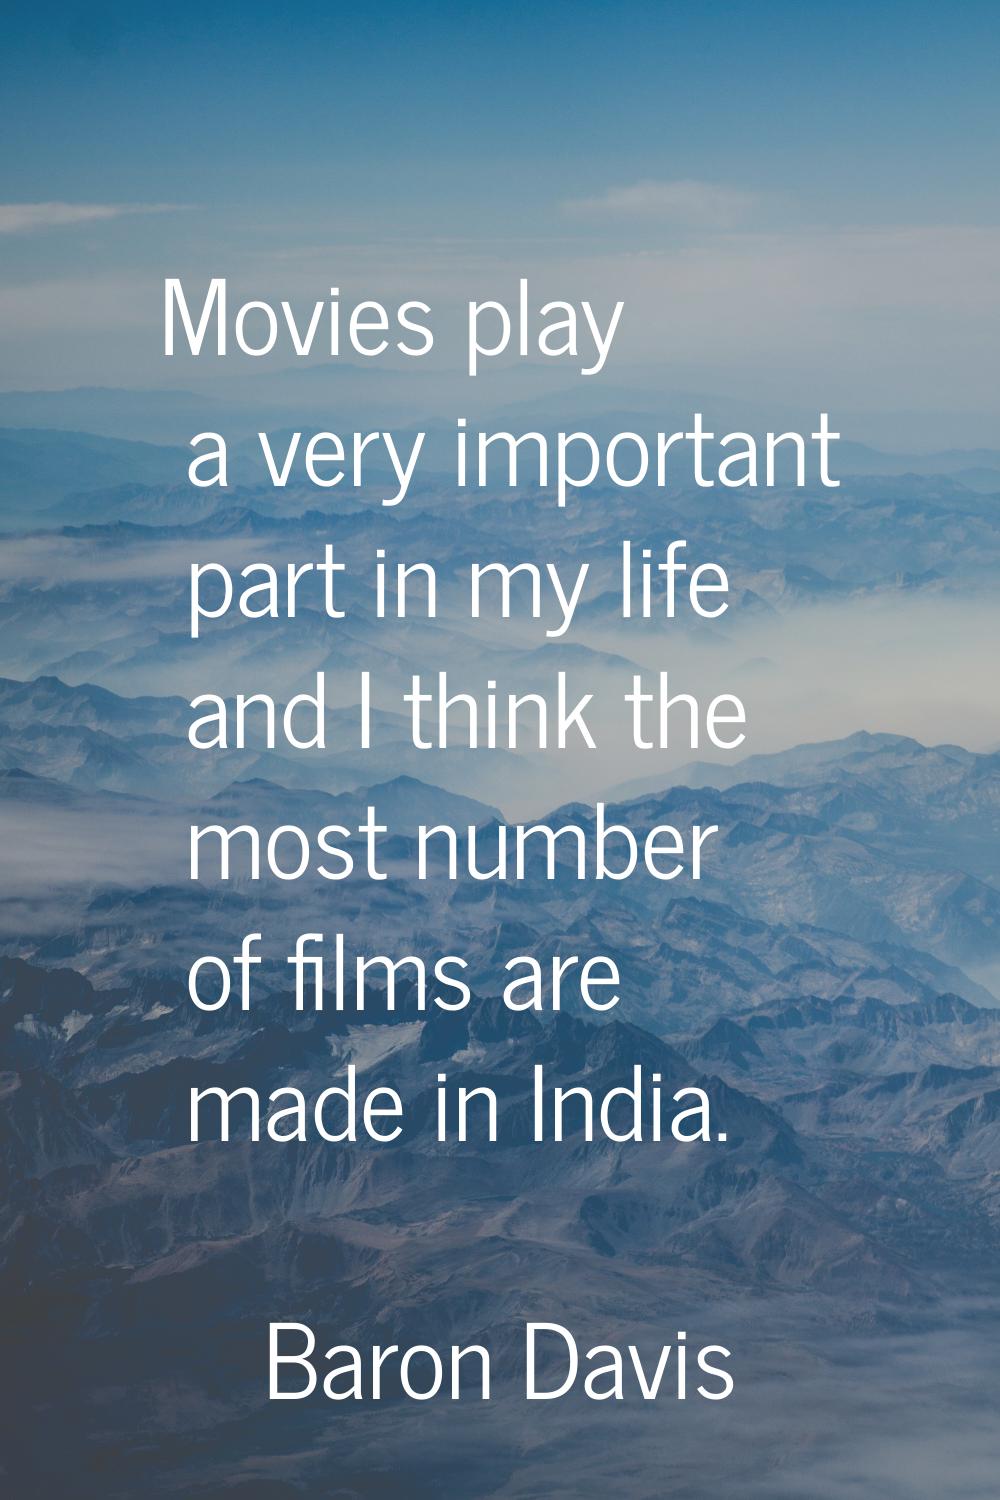 Movies play a very important part in my life and I think the most number of films are made in India